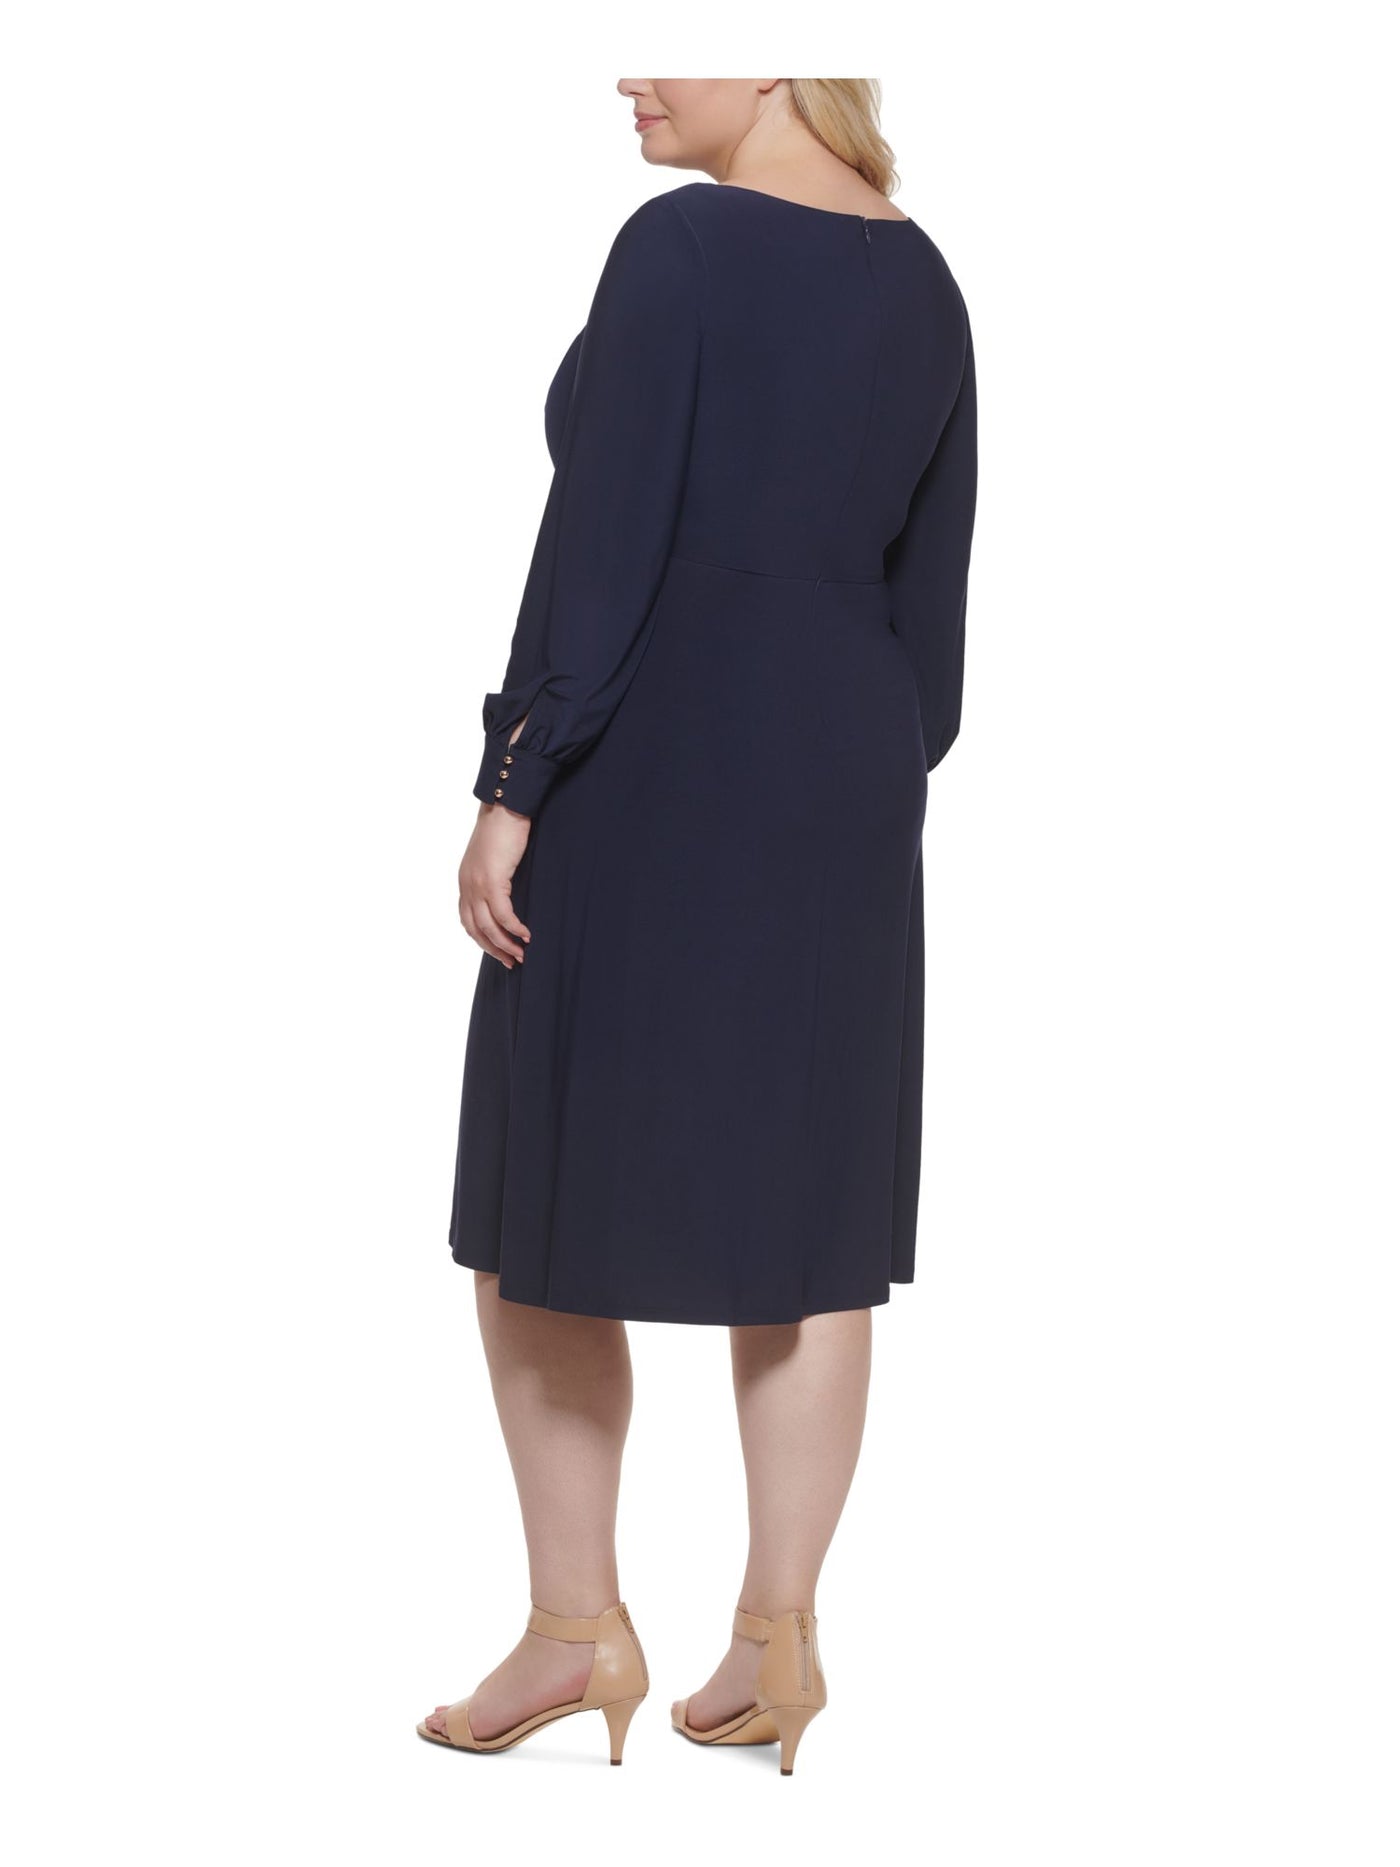 JESSICA HOWARD Womens Navy Stretch Zippered Crossover Detail At Waist Long Sleeve Jewel Neck Knee Length Wear To Work Fit + Flare Dress Plus 24W